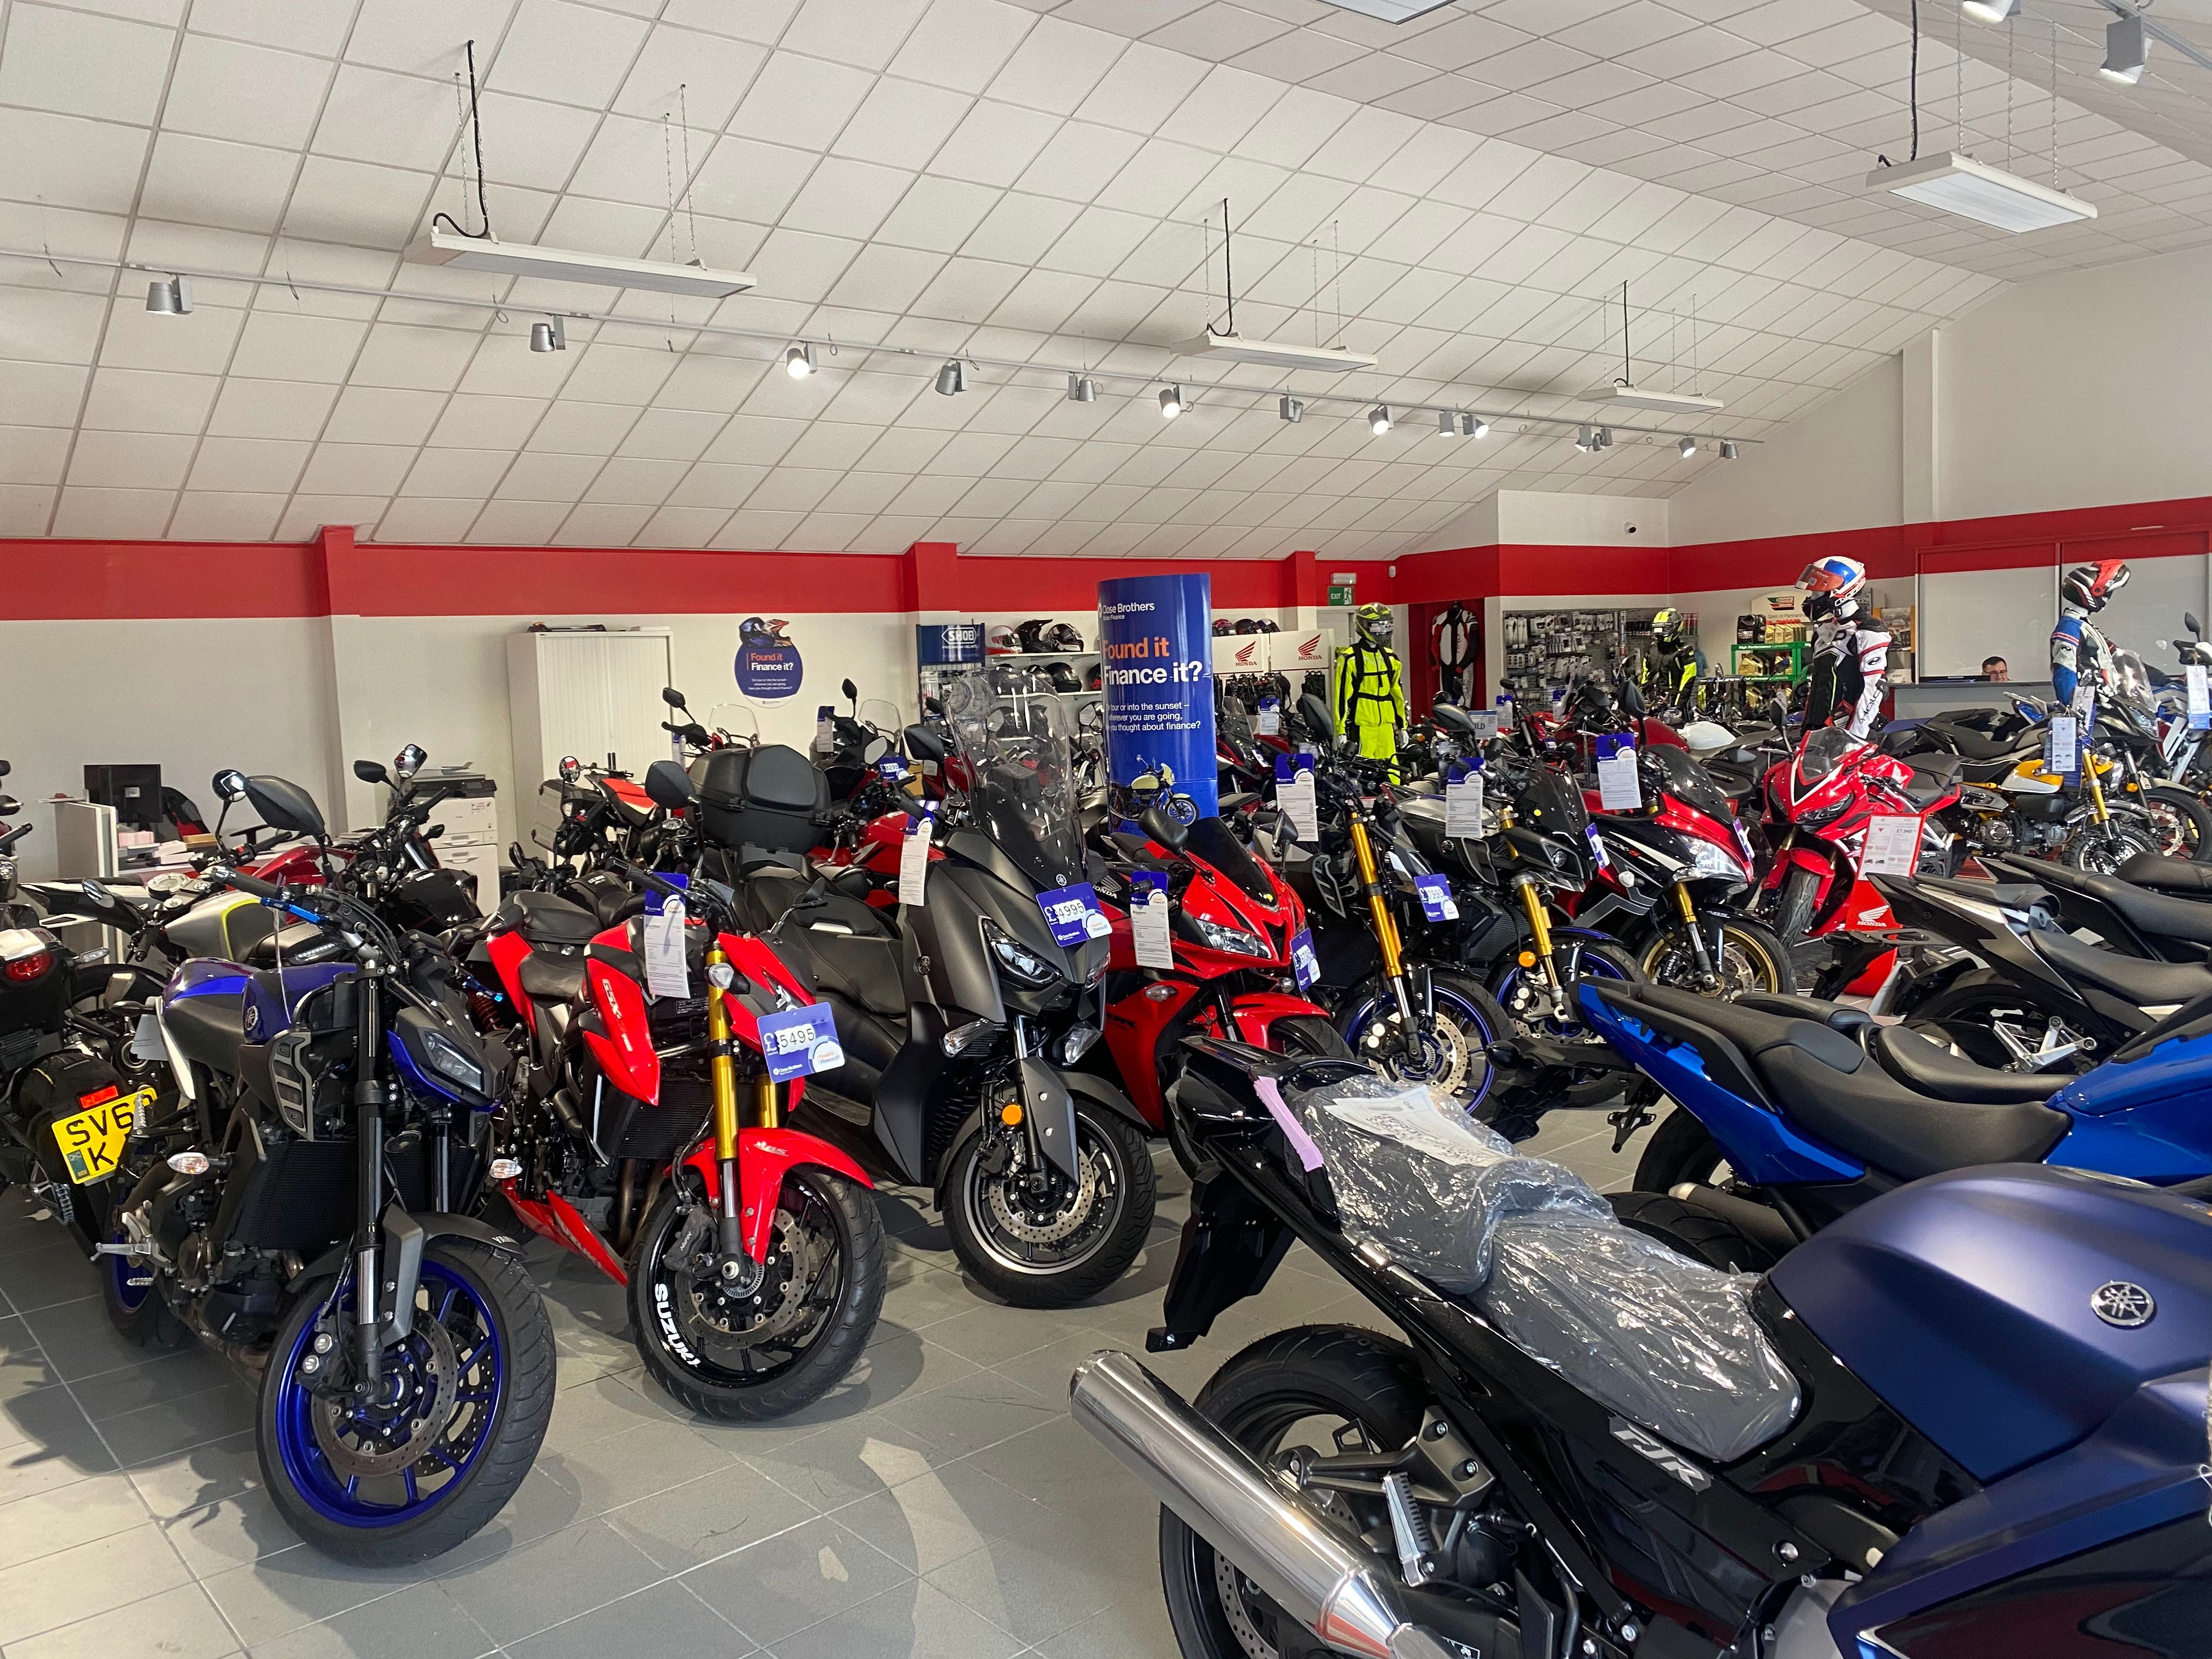 Ecosse Motorcycles receives £150,000 funding package from RBS